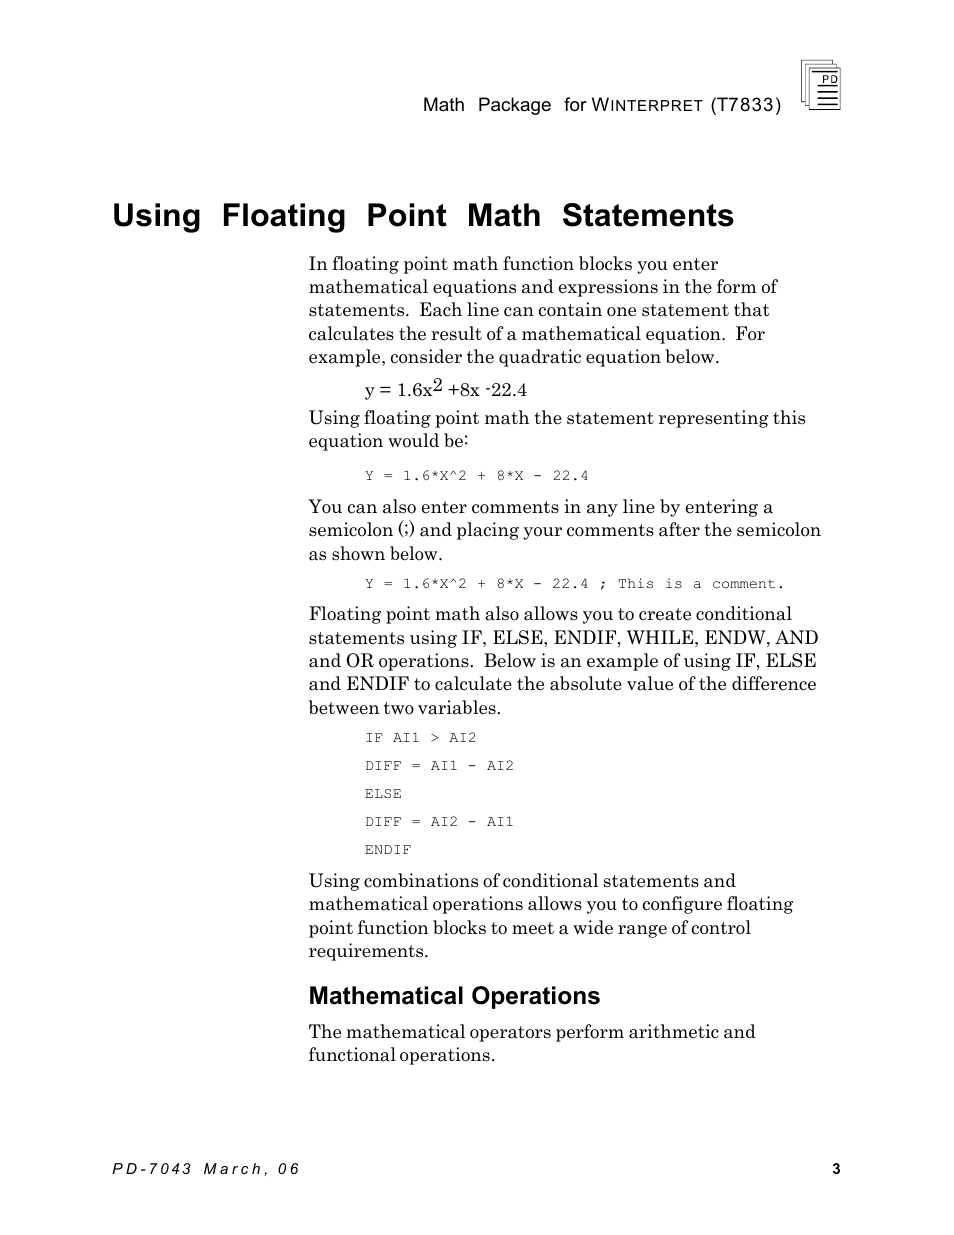 Using floating point math statements, Mathematical operations | Rockwell Automation T7833 ICS Regent+Plus Math Package for Winternet User Manual | Page 3 / 26